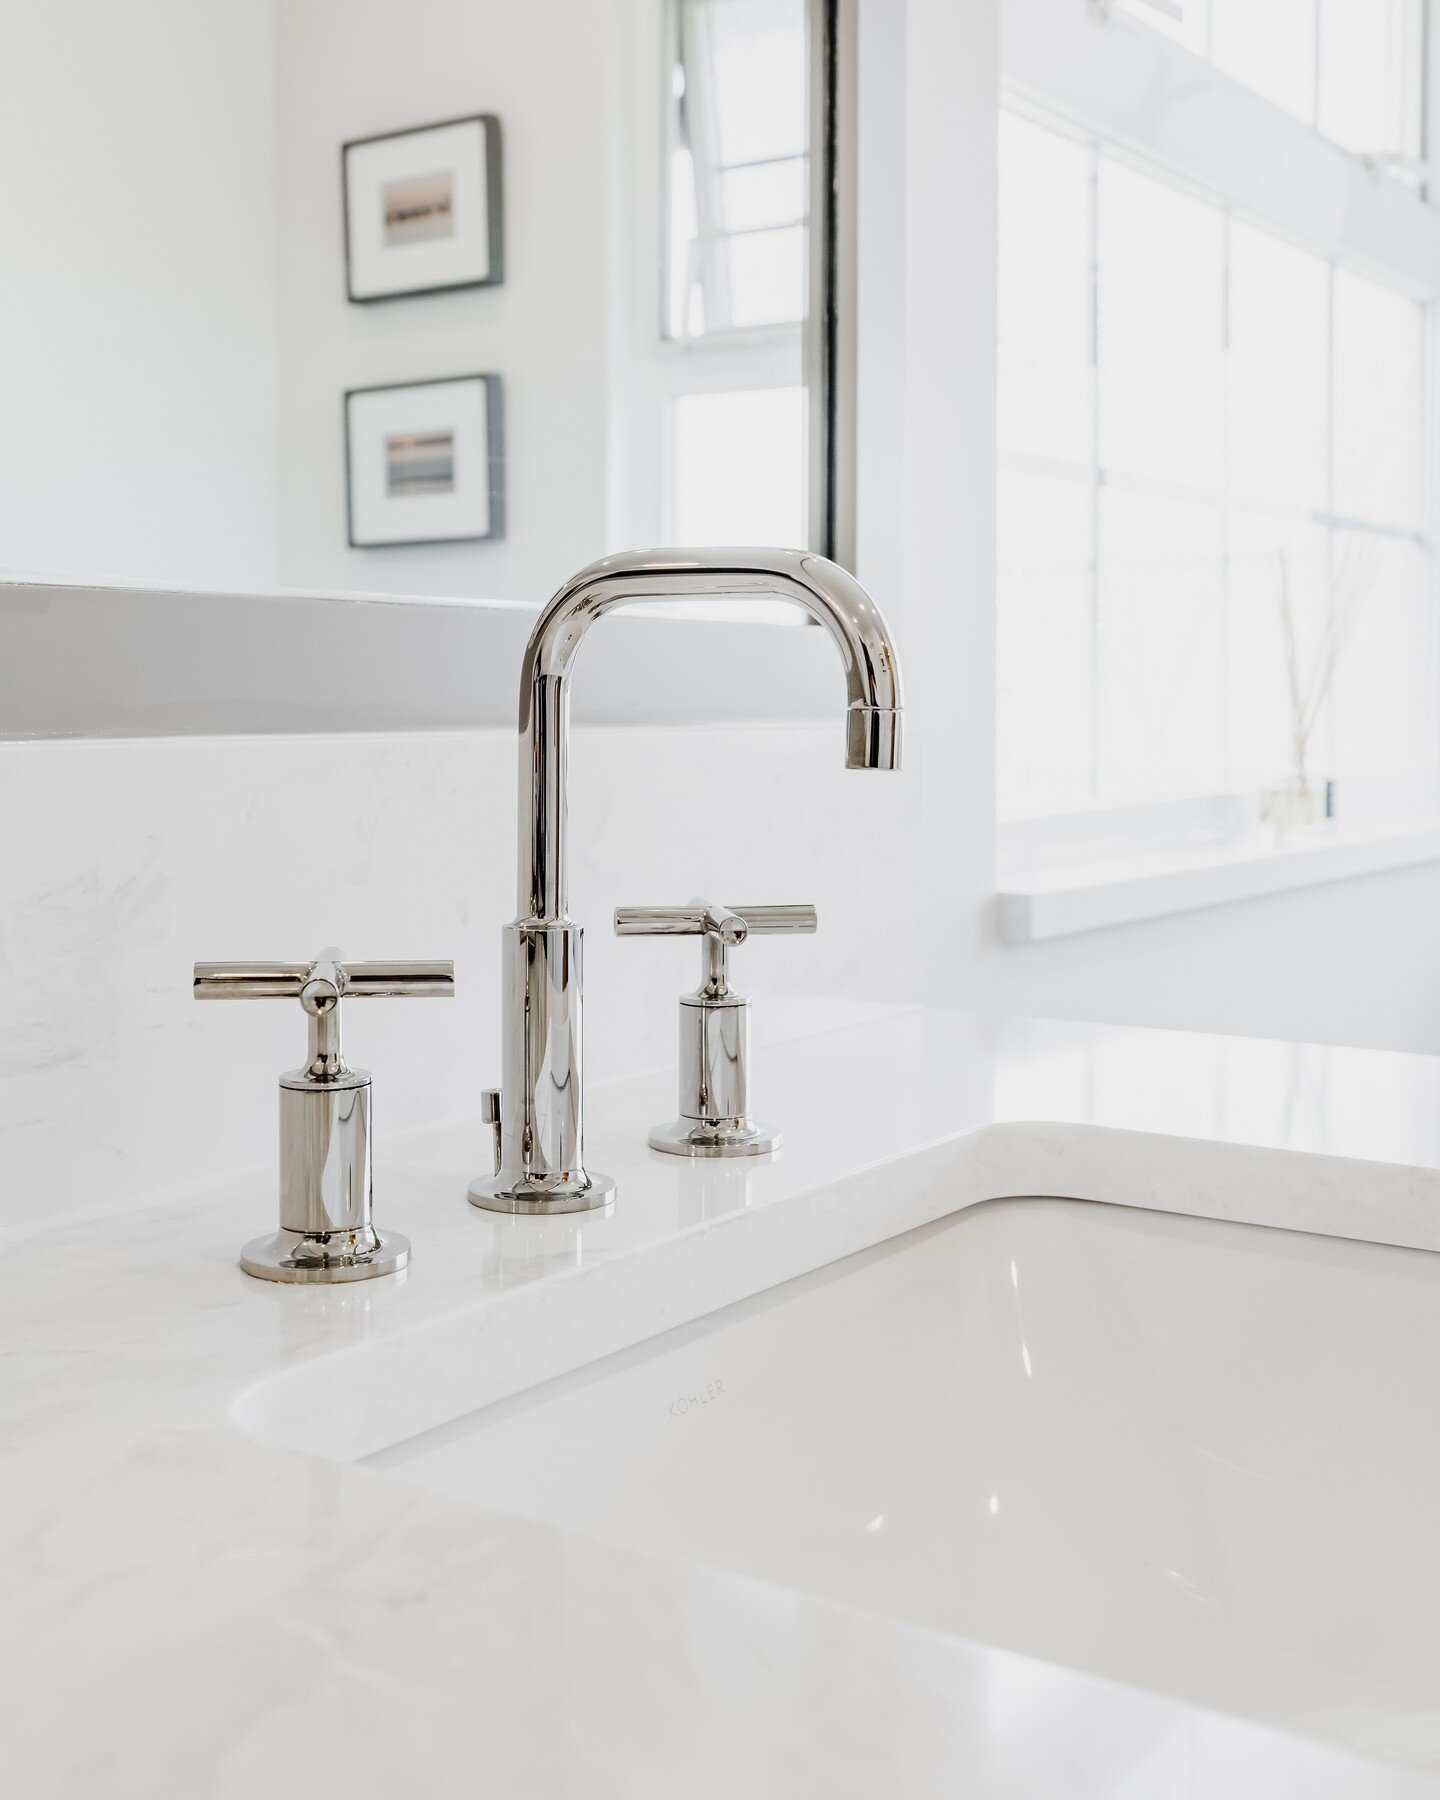 Say goodbye to outdated fixtures and hello to a space that exudes sophistication and modern elegance.

#bathroomsink #bathroomtransformation #interiordesigner #BCIT #primaryensuite #bathroomrenovation #bathroomdesign #renovation #yvrdesign #homerenov